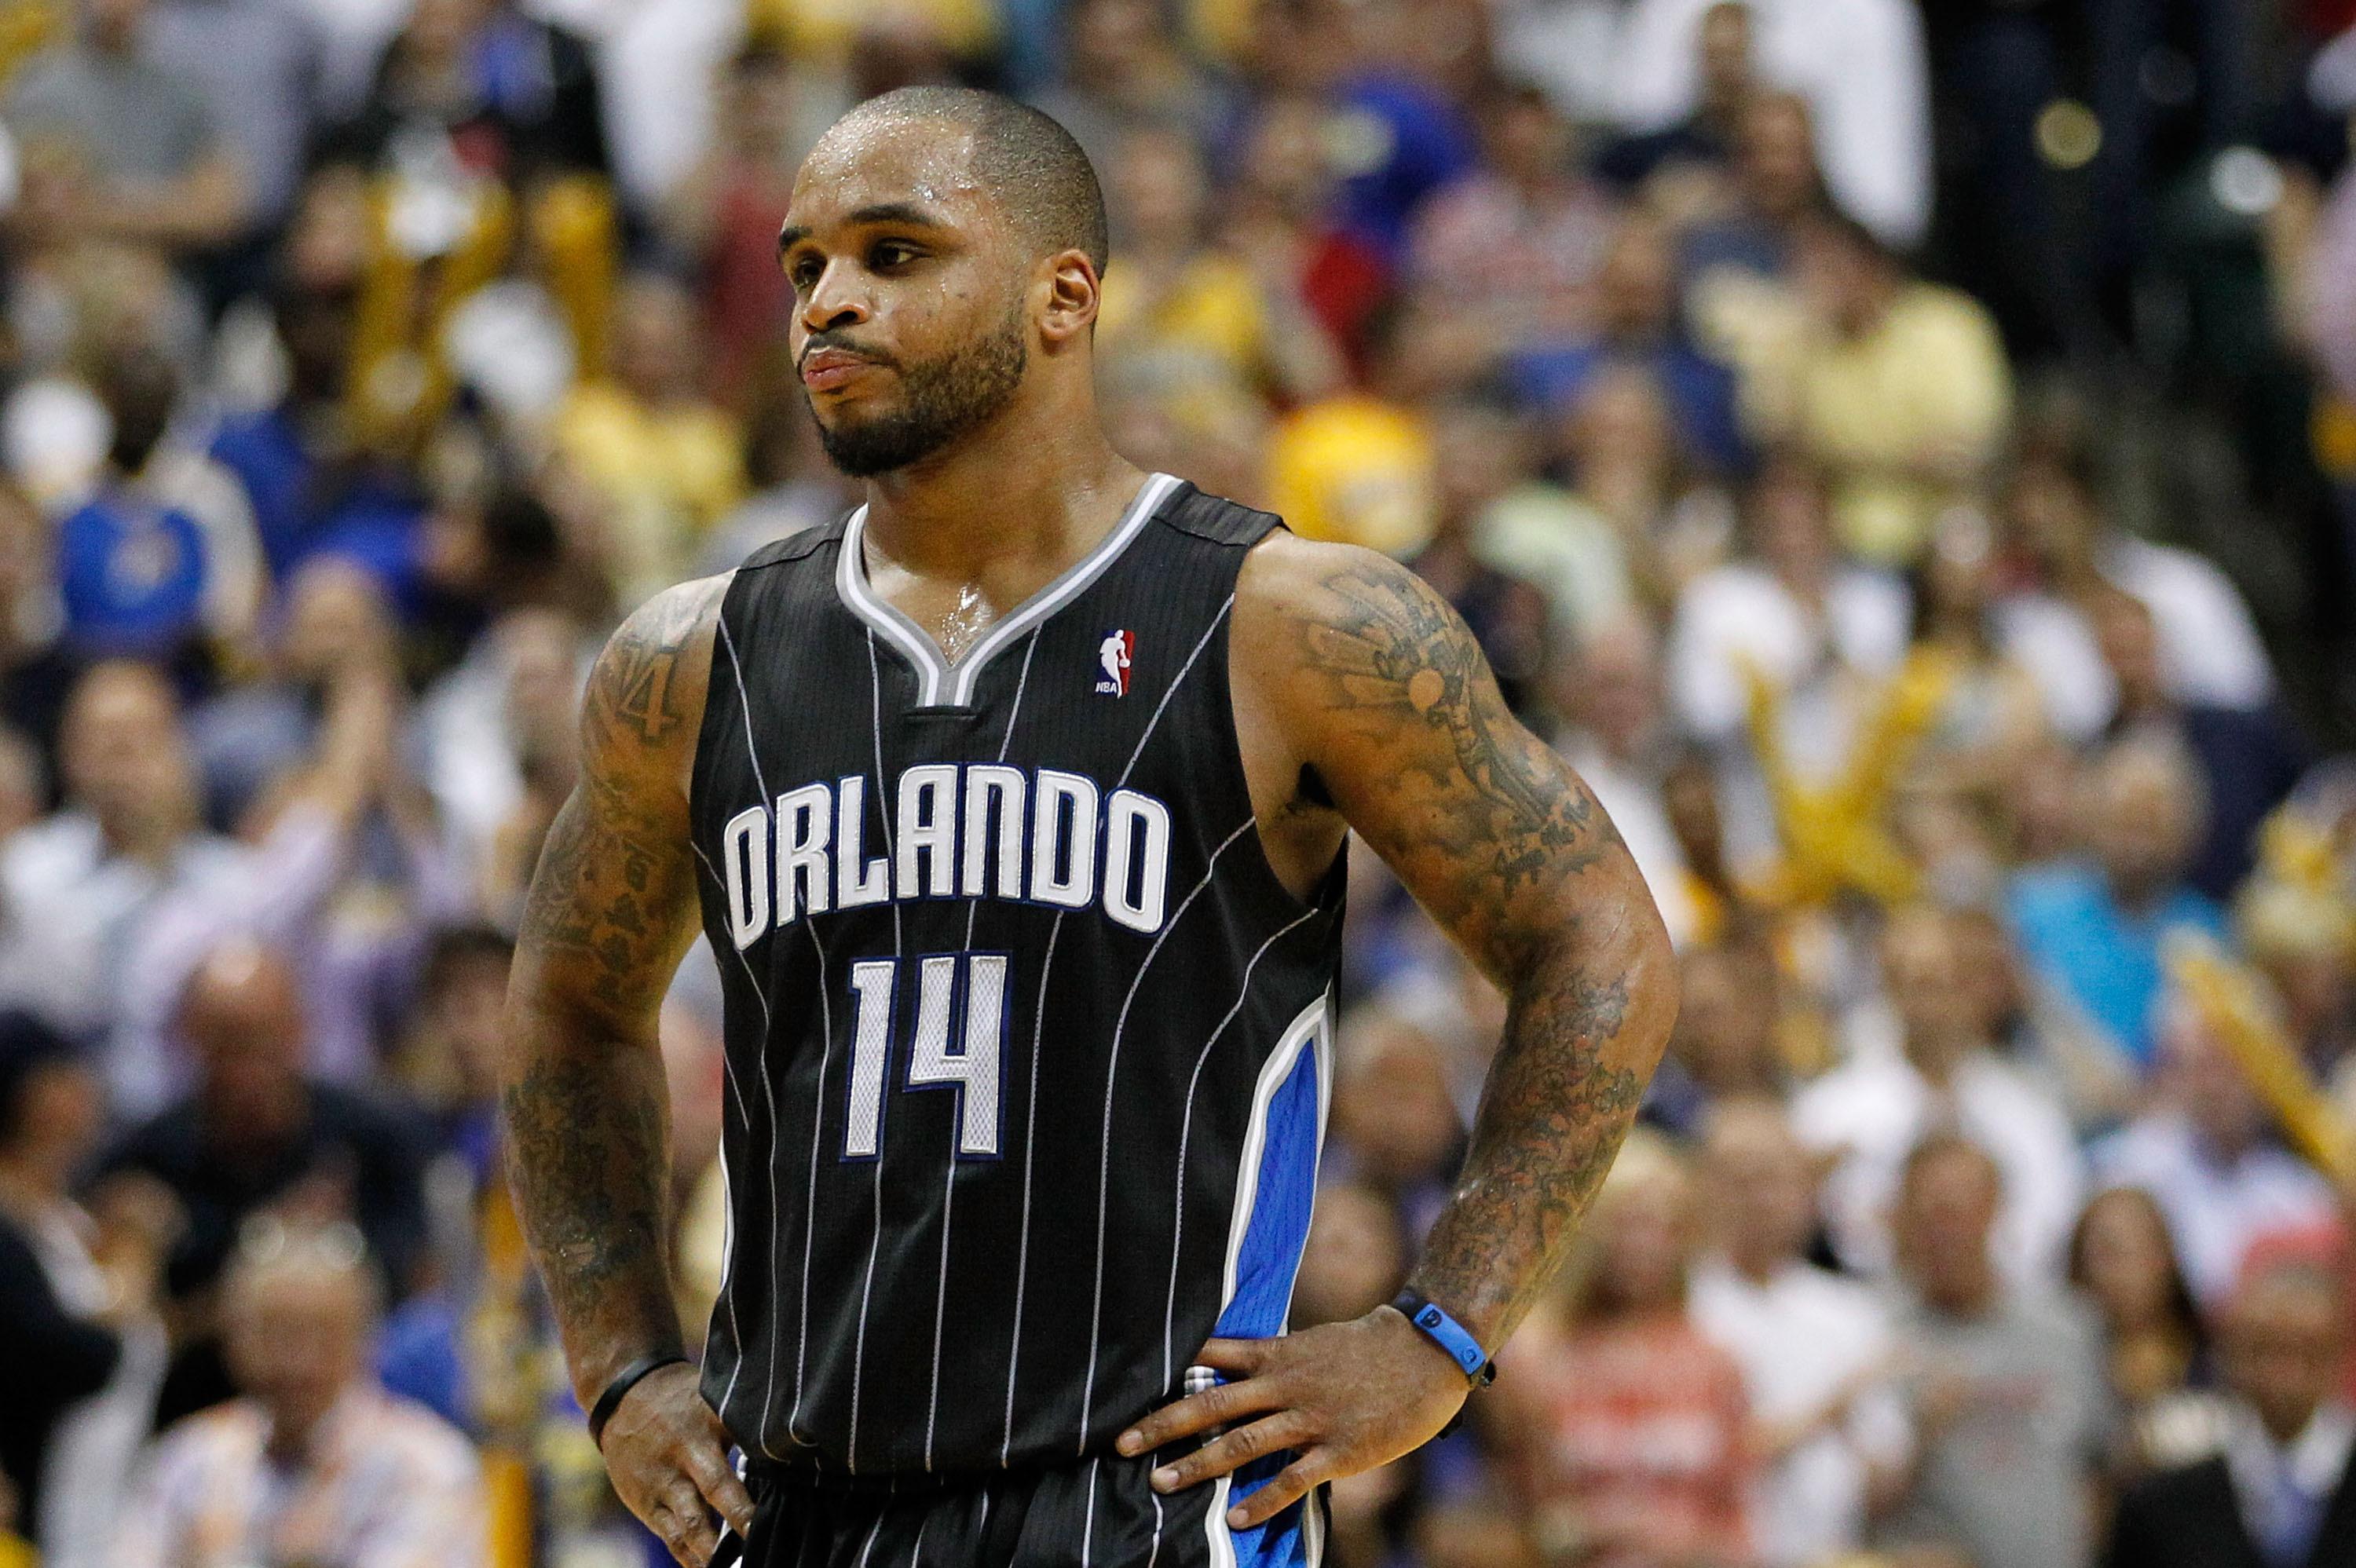 Jameer Nelson Re-Signs With Orlando Magic, According To Report 